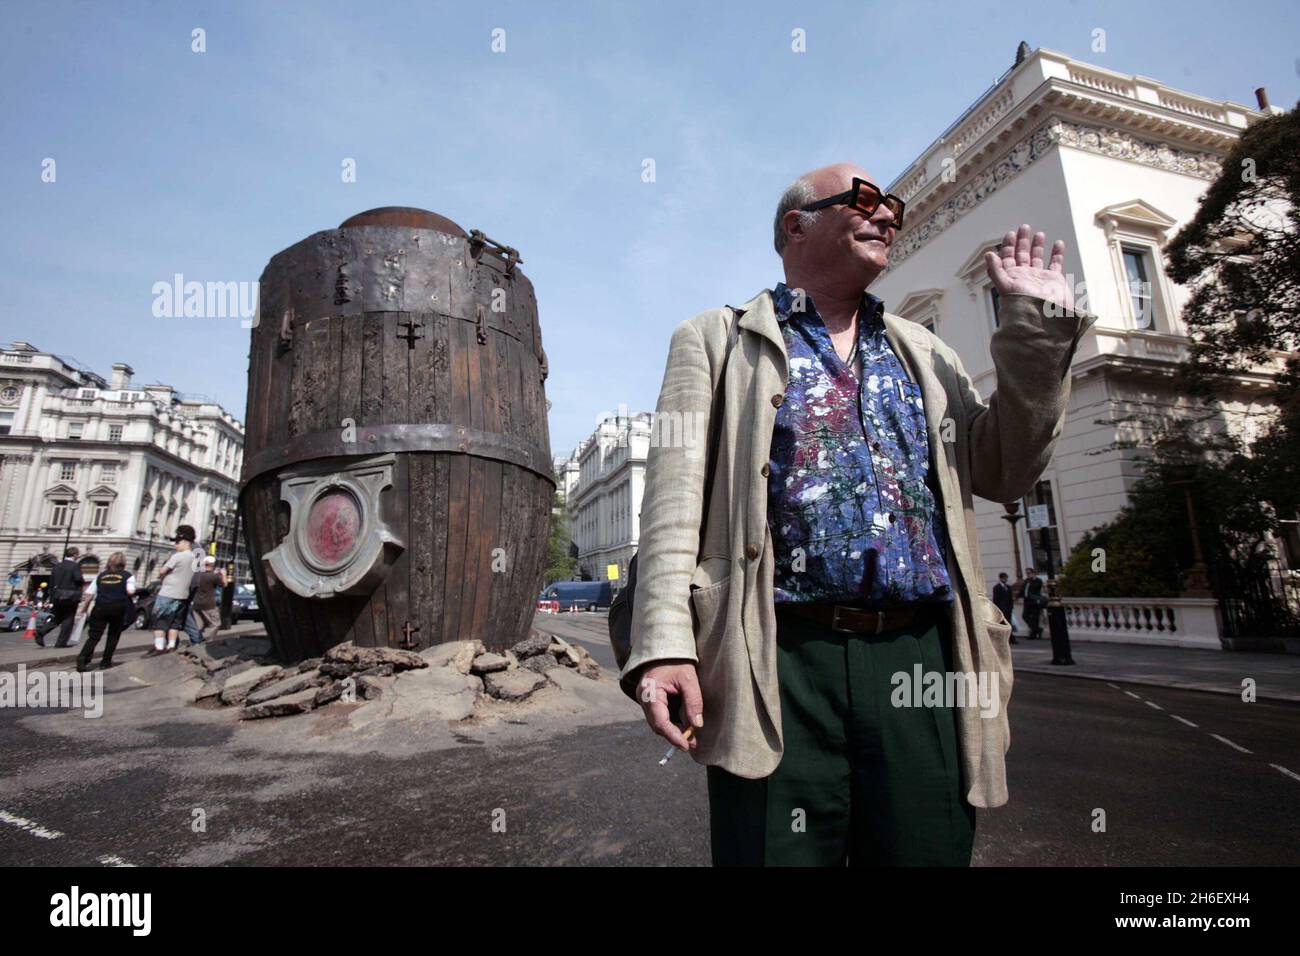 A giant smoking rocket was buried in the street in Waterloo place, London. Part of The Sultan's Elephant, a street theatre show by French company Royal De Luxe. Stock Photo